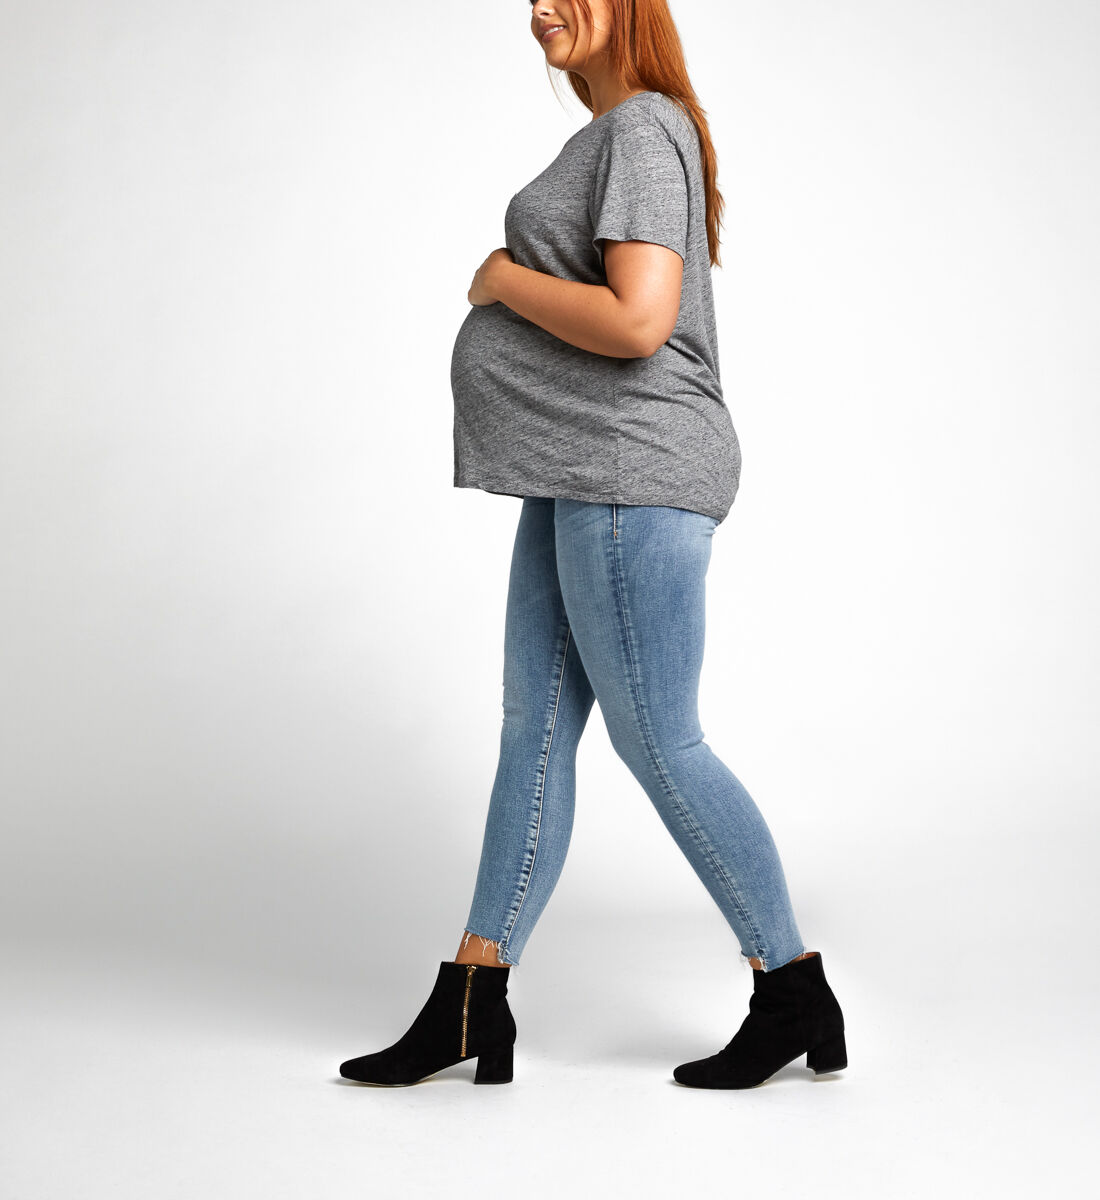 Aiko Ankle Skinny Maternity Jeans Alt Image 1